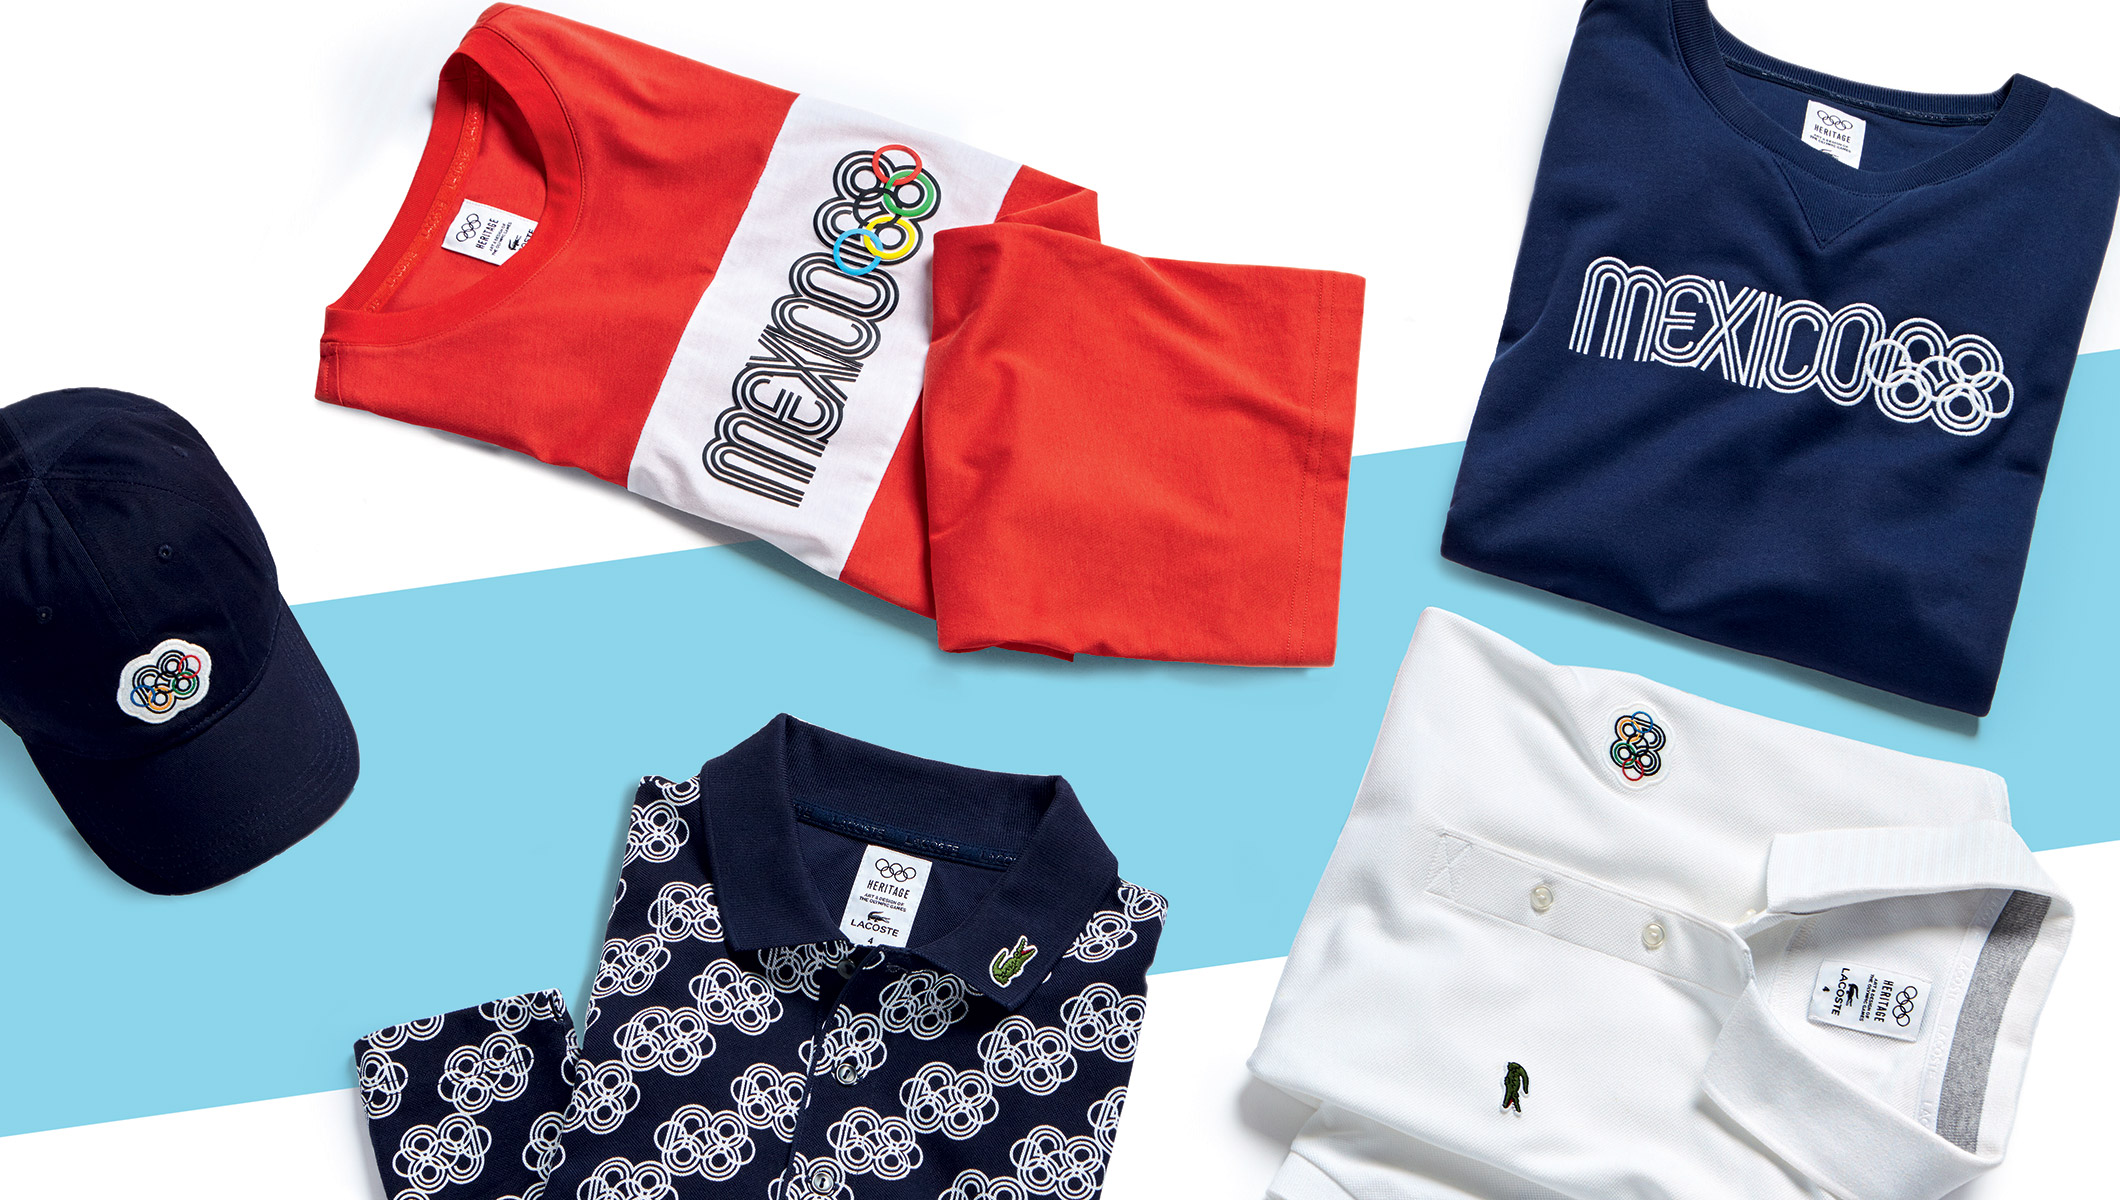 Lacoste to celebrate iconic Olympic heritage with new apparel line ...